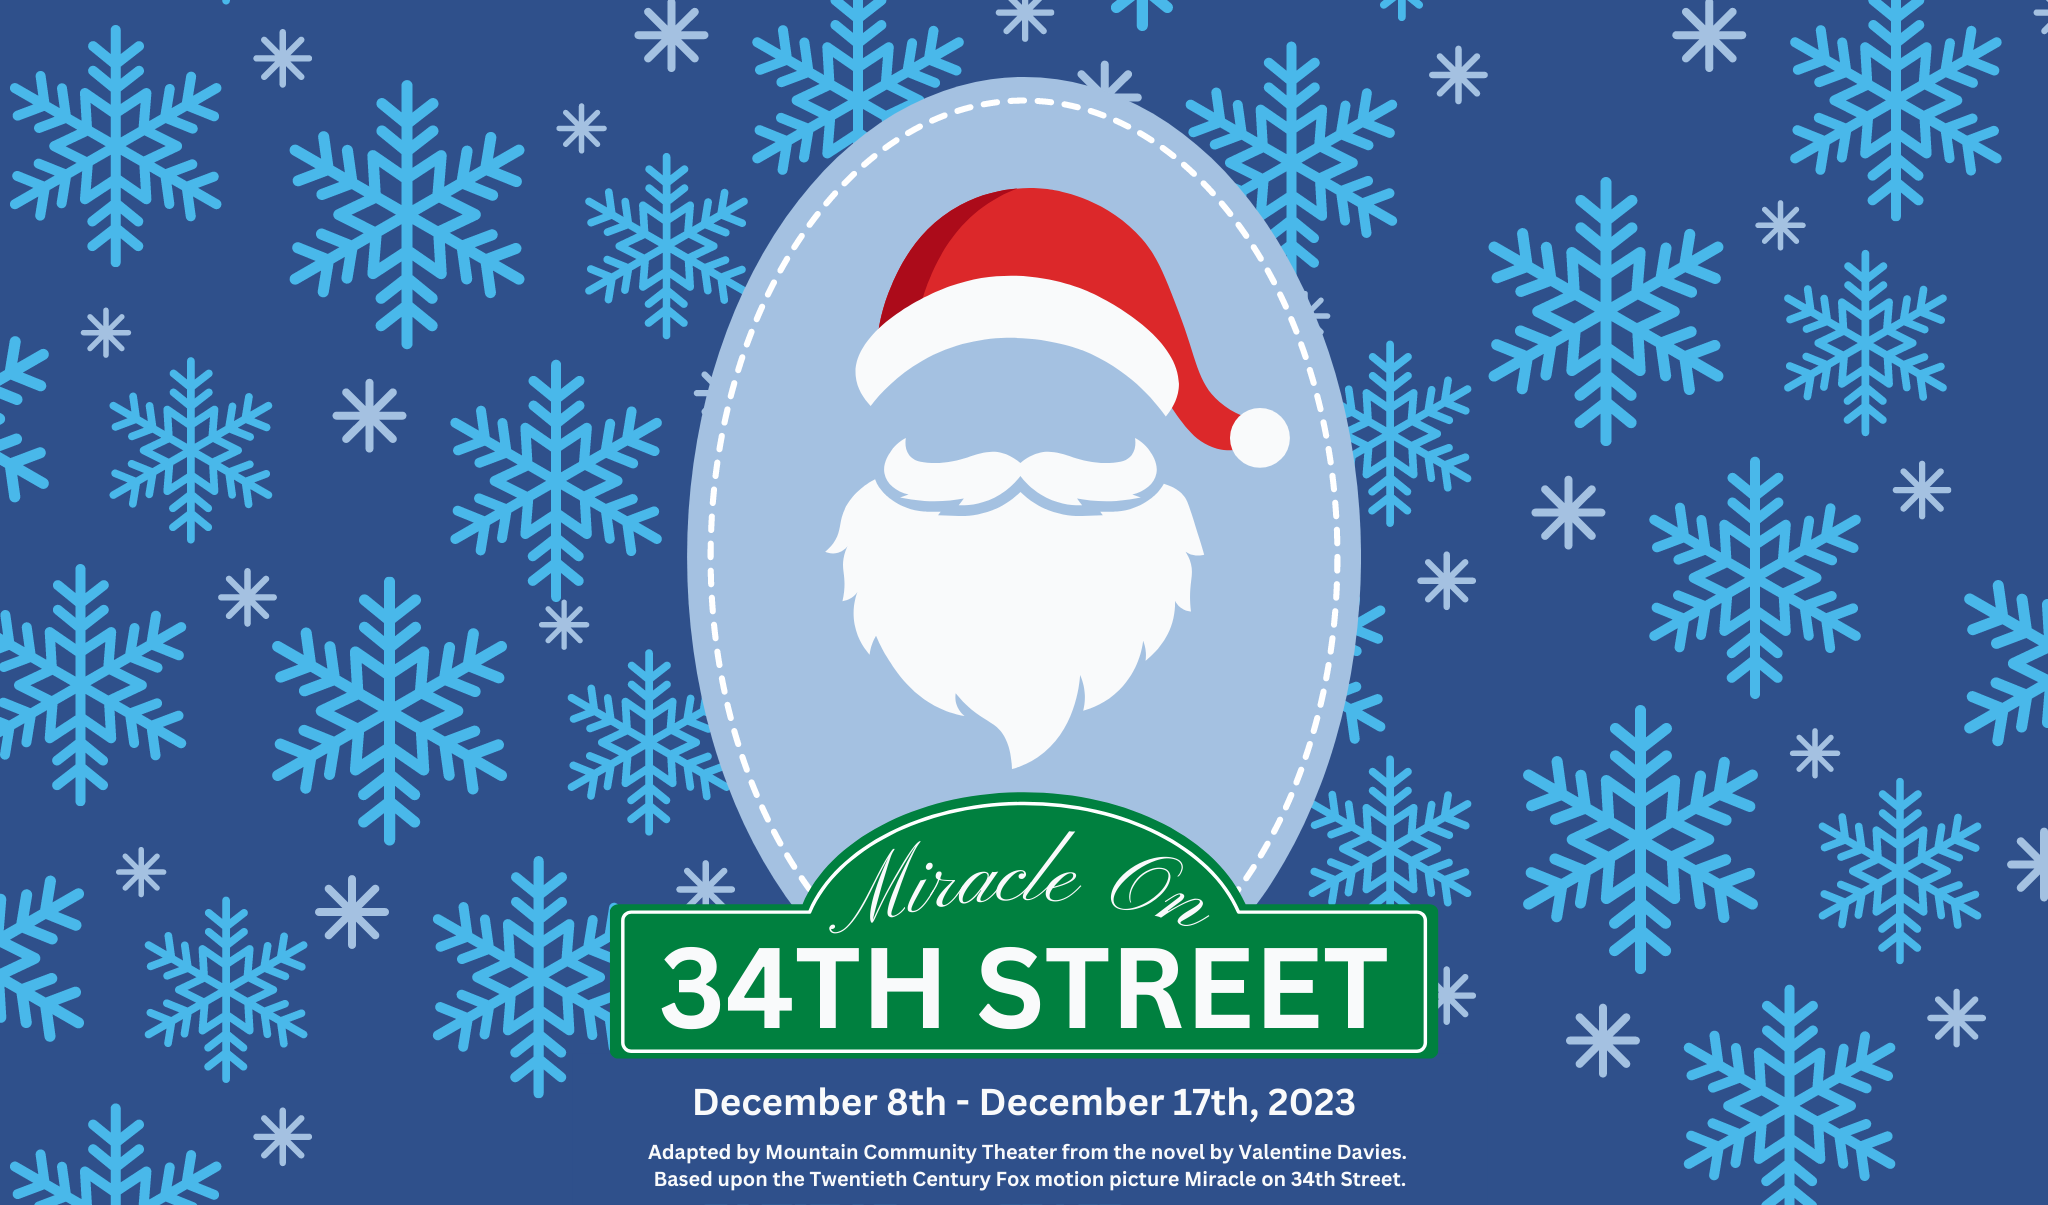 Featured image for “Miracle on 34th Street”